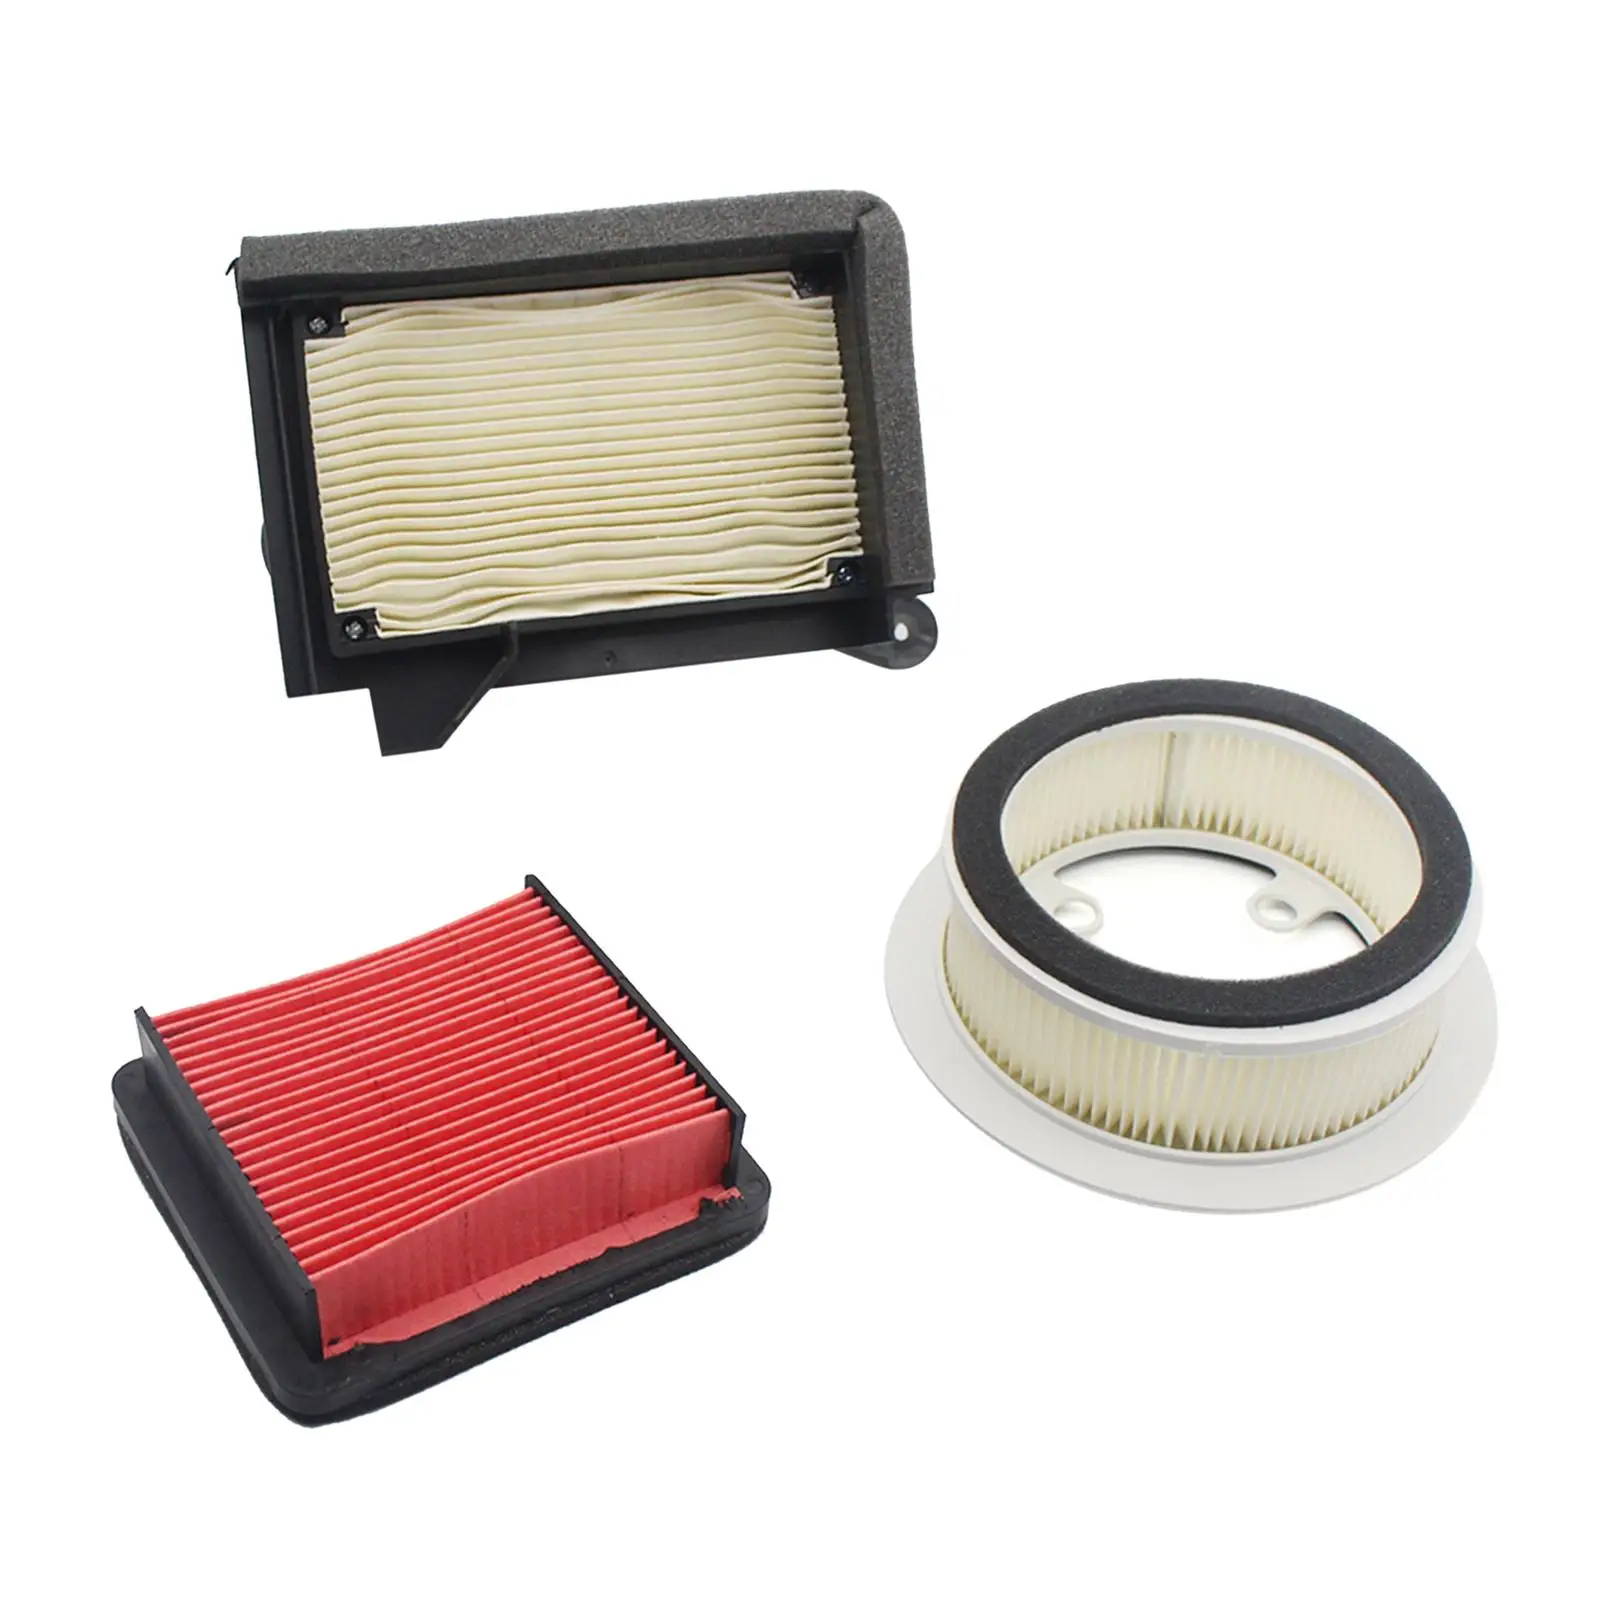 3x Air Filter Cleaners for XP530 530 SX/017 2018 2019, Easy to Install